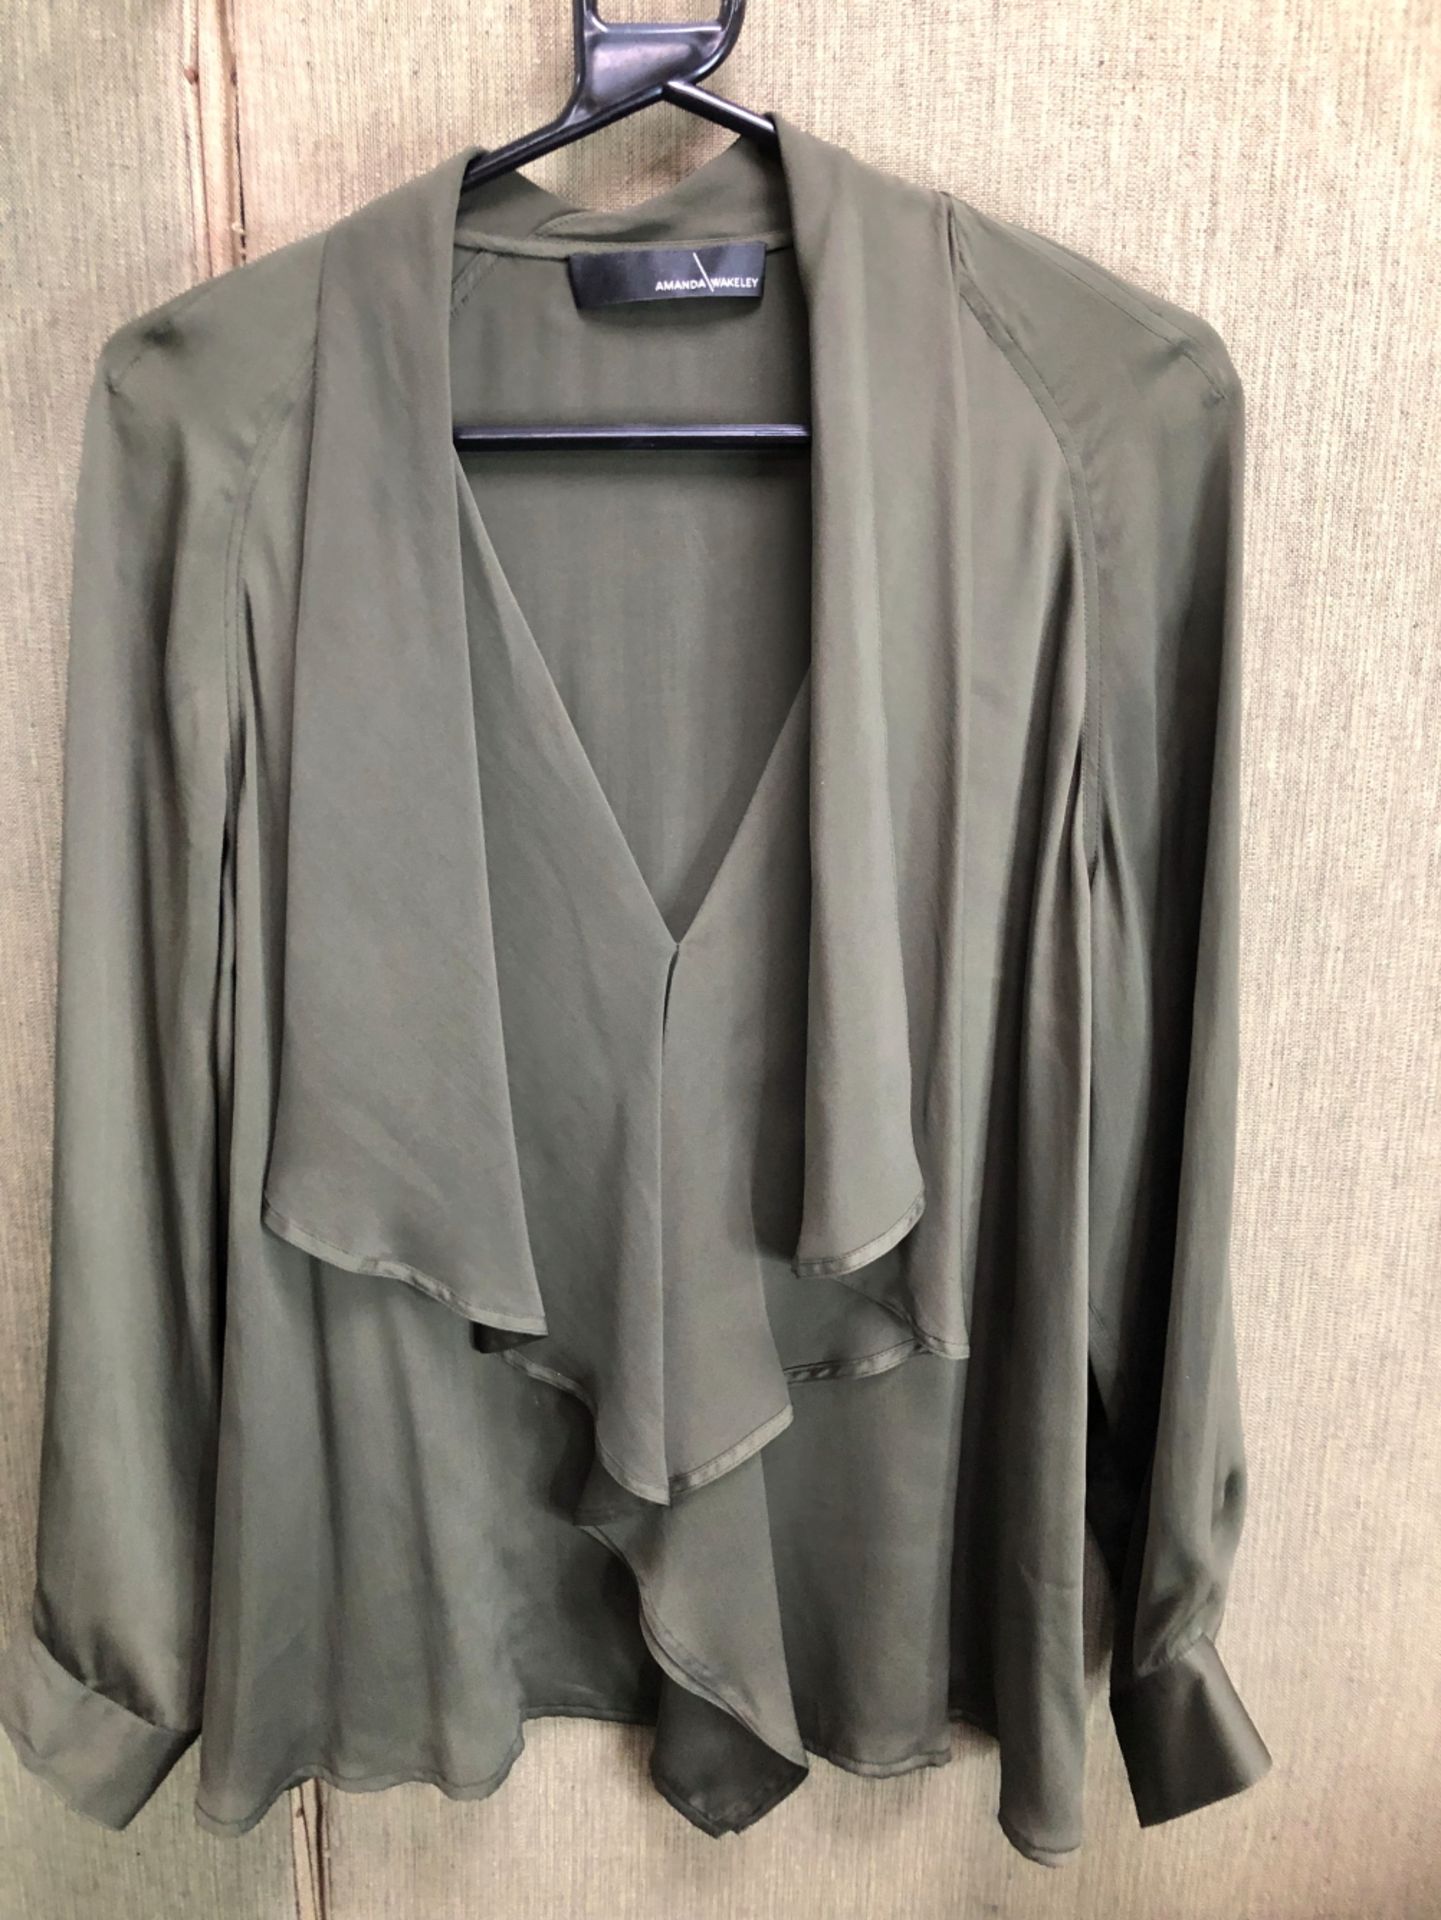 AN AMANDA WAKELEY OLIVE GREEN SILK BLOUSE SIZE 14, TOGETHER WITH A PAIR OF JING WANG FLARED JEANS - Image 11 of 16